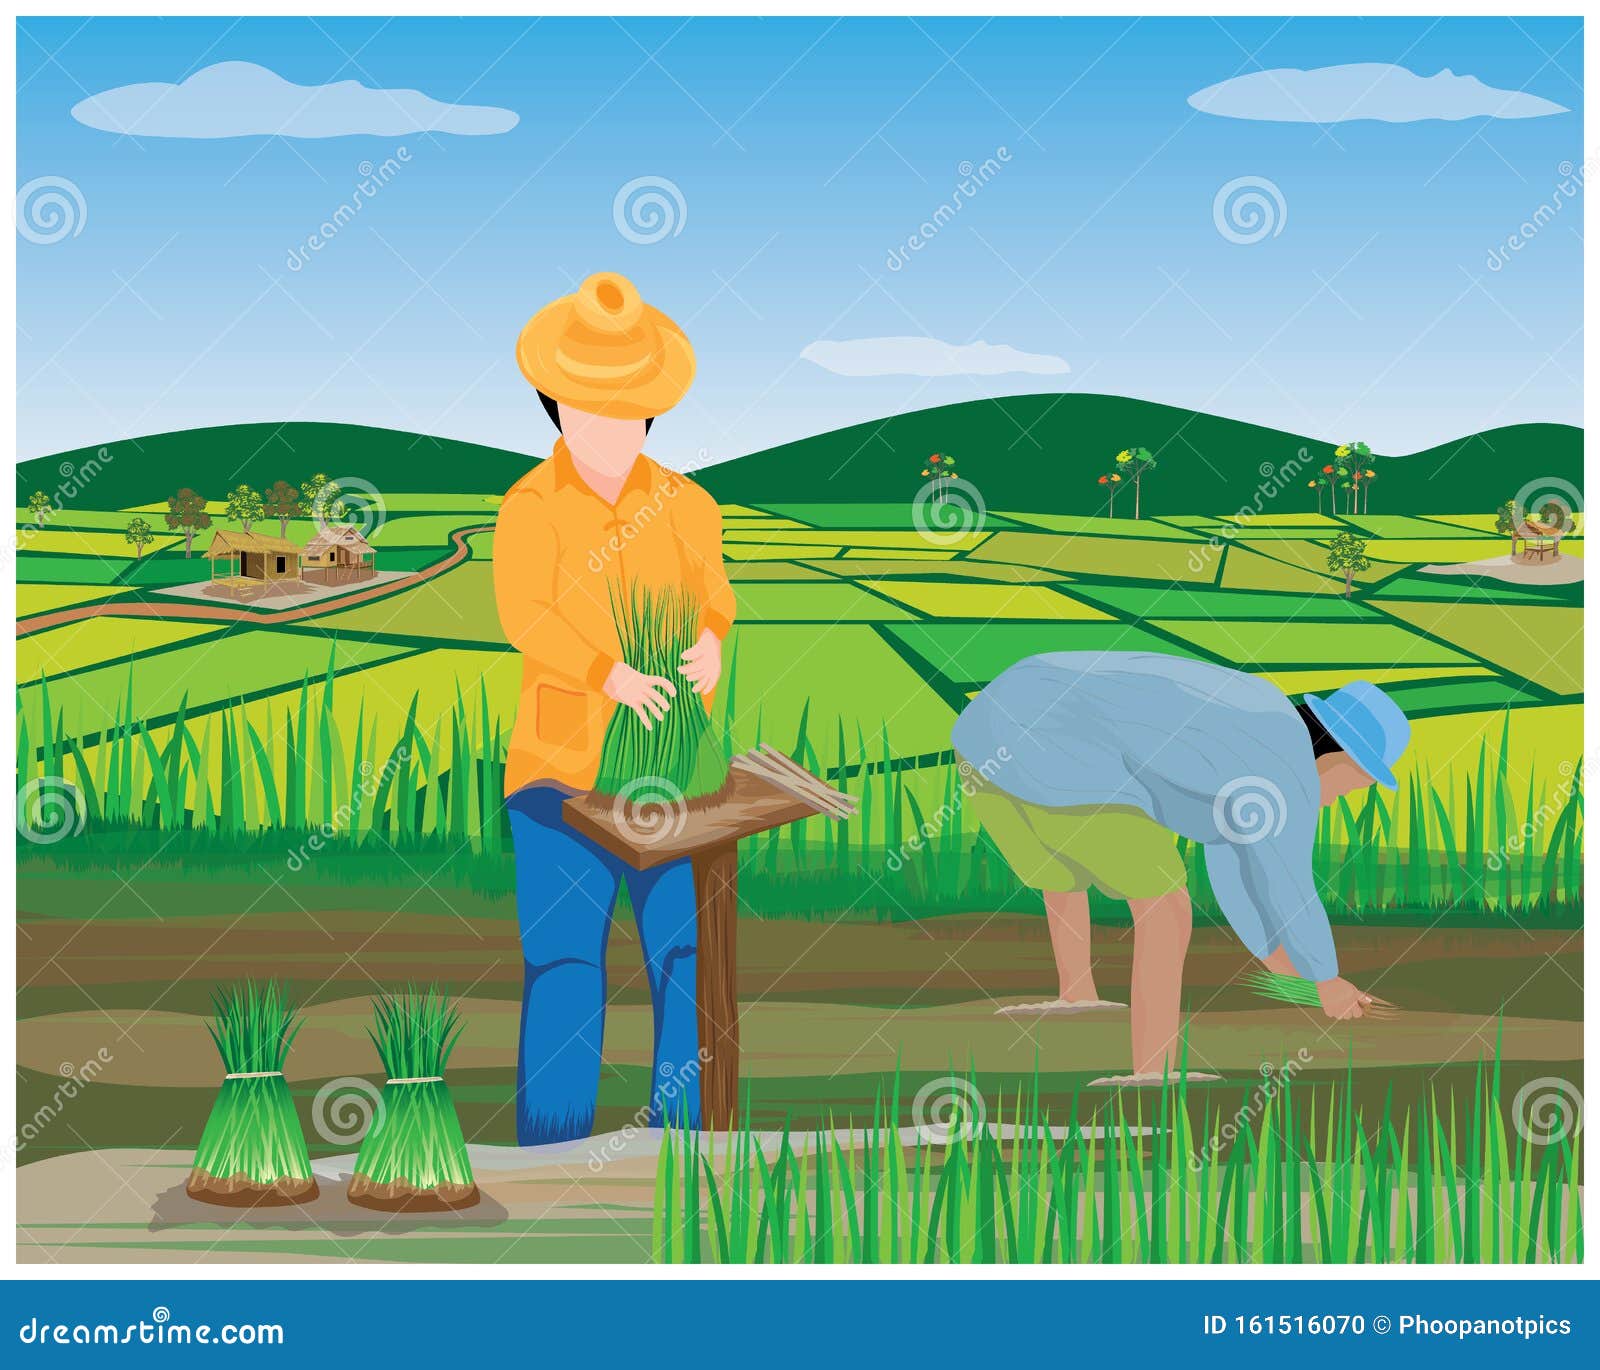 Farmer work in paddy field stock vector. Illustration of people - 161516070